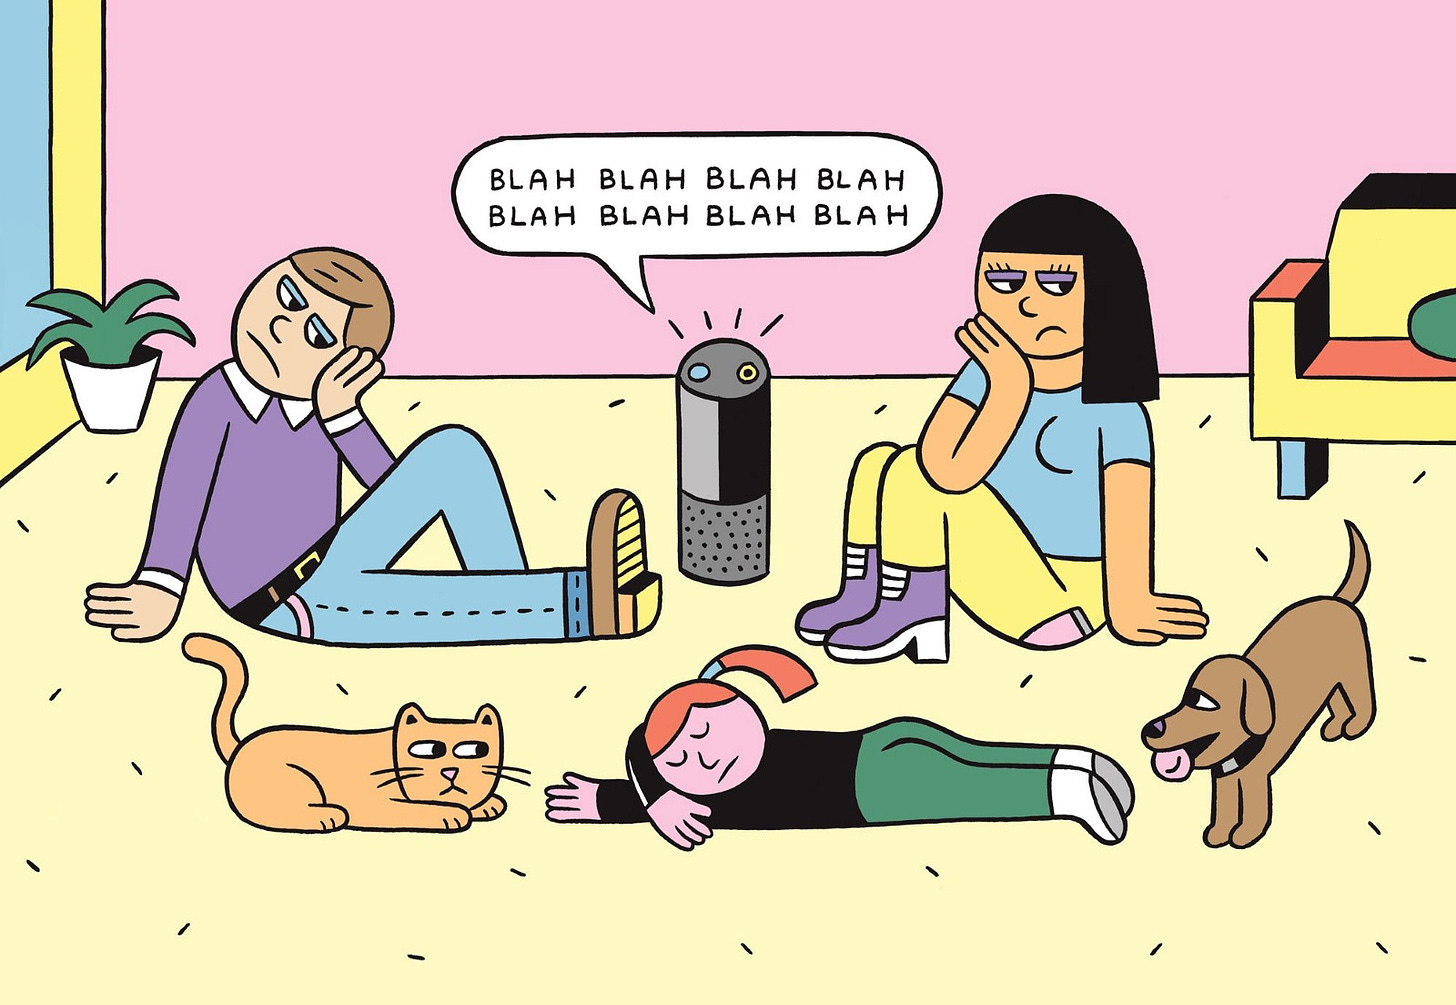 A flat illustration of a family looking bored with an Amazon Alexa blurting out “blah blah blah.”